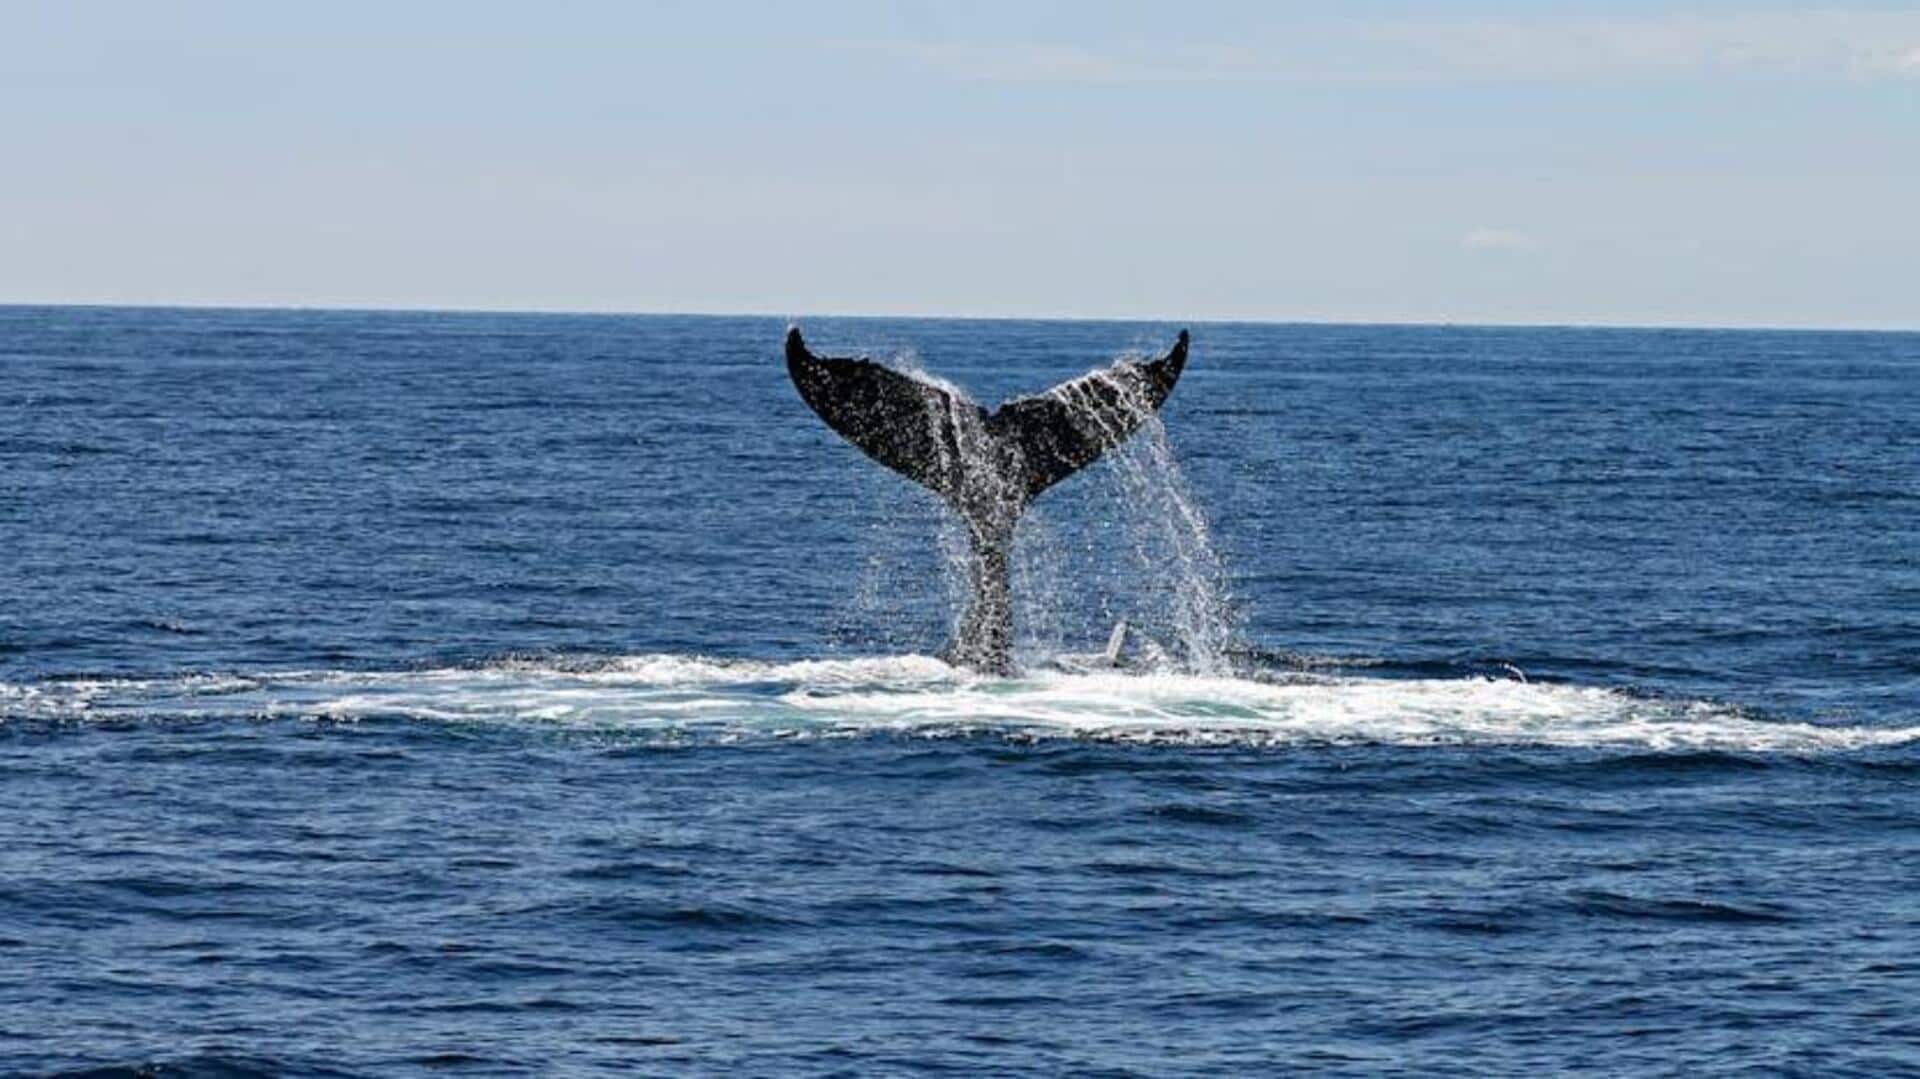 Cape Town's whale-watching season guide